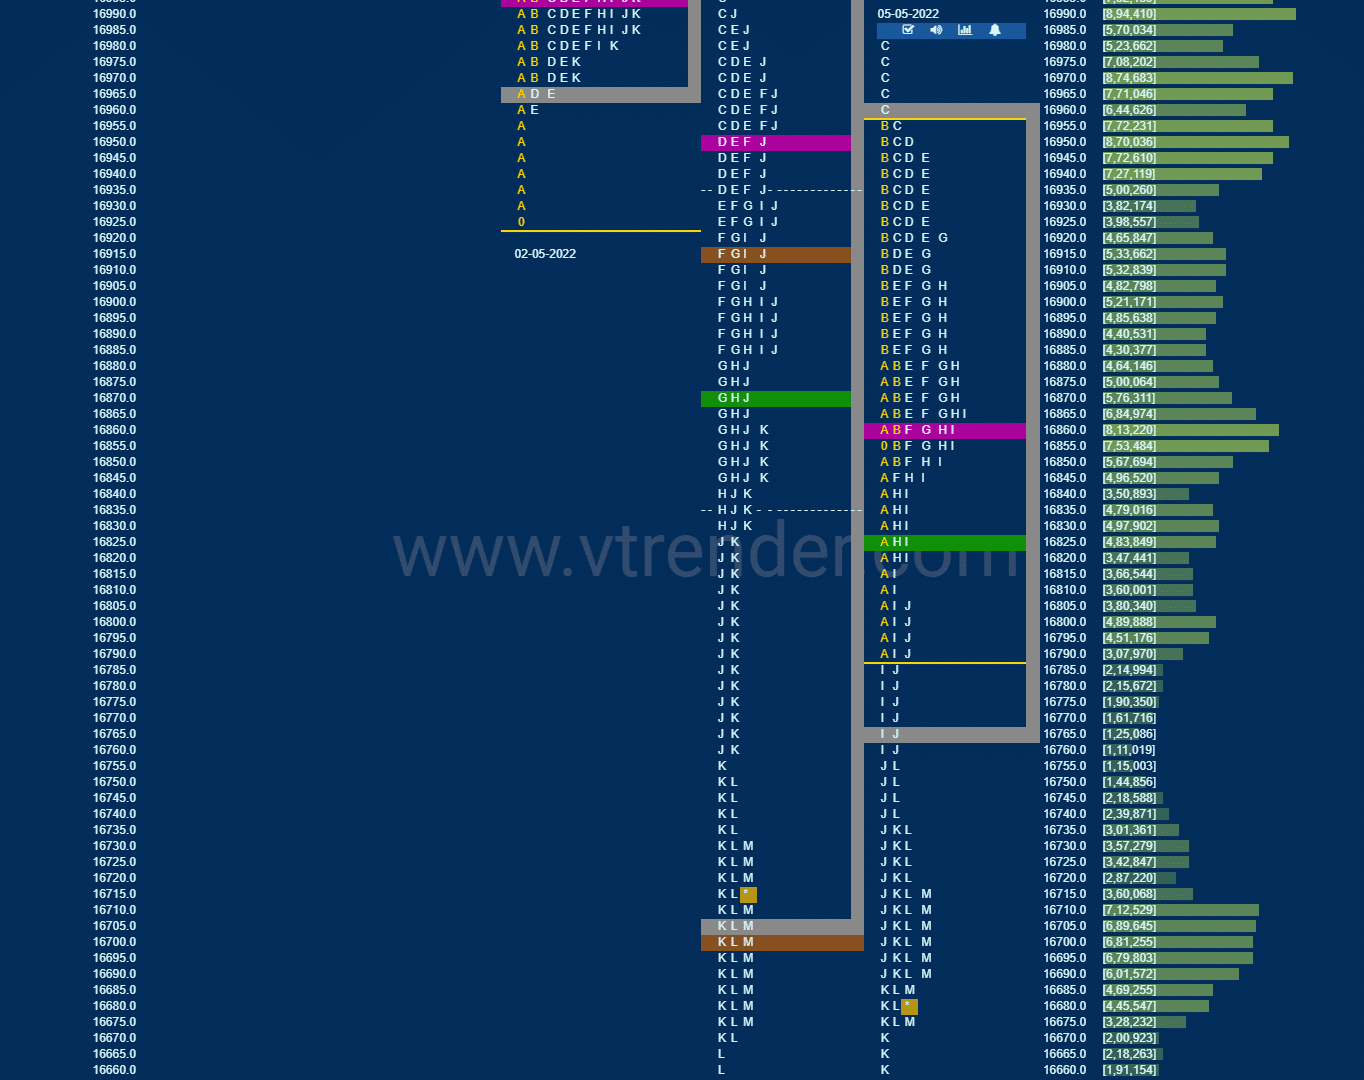 Nf 3 Market Profile Analysis Dated 05Th May 2022 Banknifty Futures, Charts, Day Trading, Intraday Trading, Intraday Trading Strategies, Market Profile, Market Profile Trading Strategies, Nifty Futures, Order Flow Analysis, Support And Resistance, Technical Analysis, Trading Strategies, Volume Profile Trading